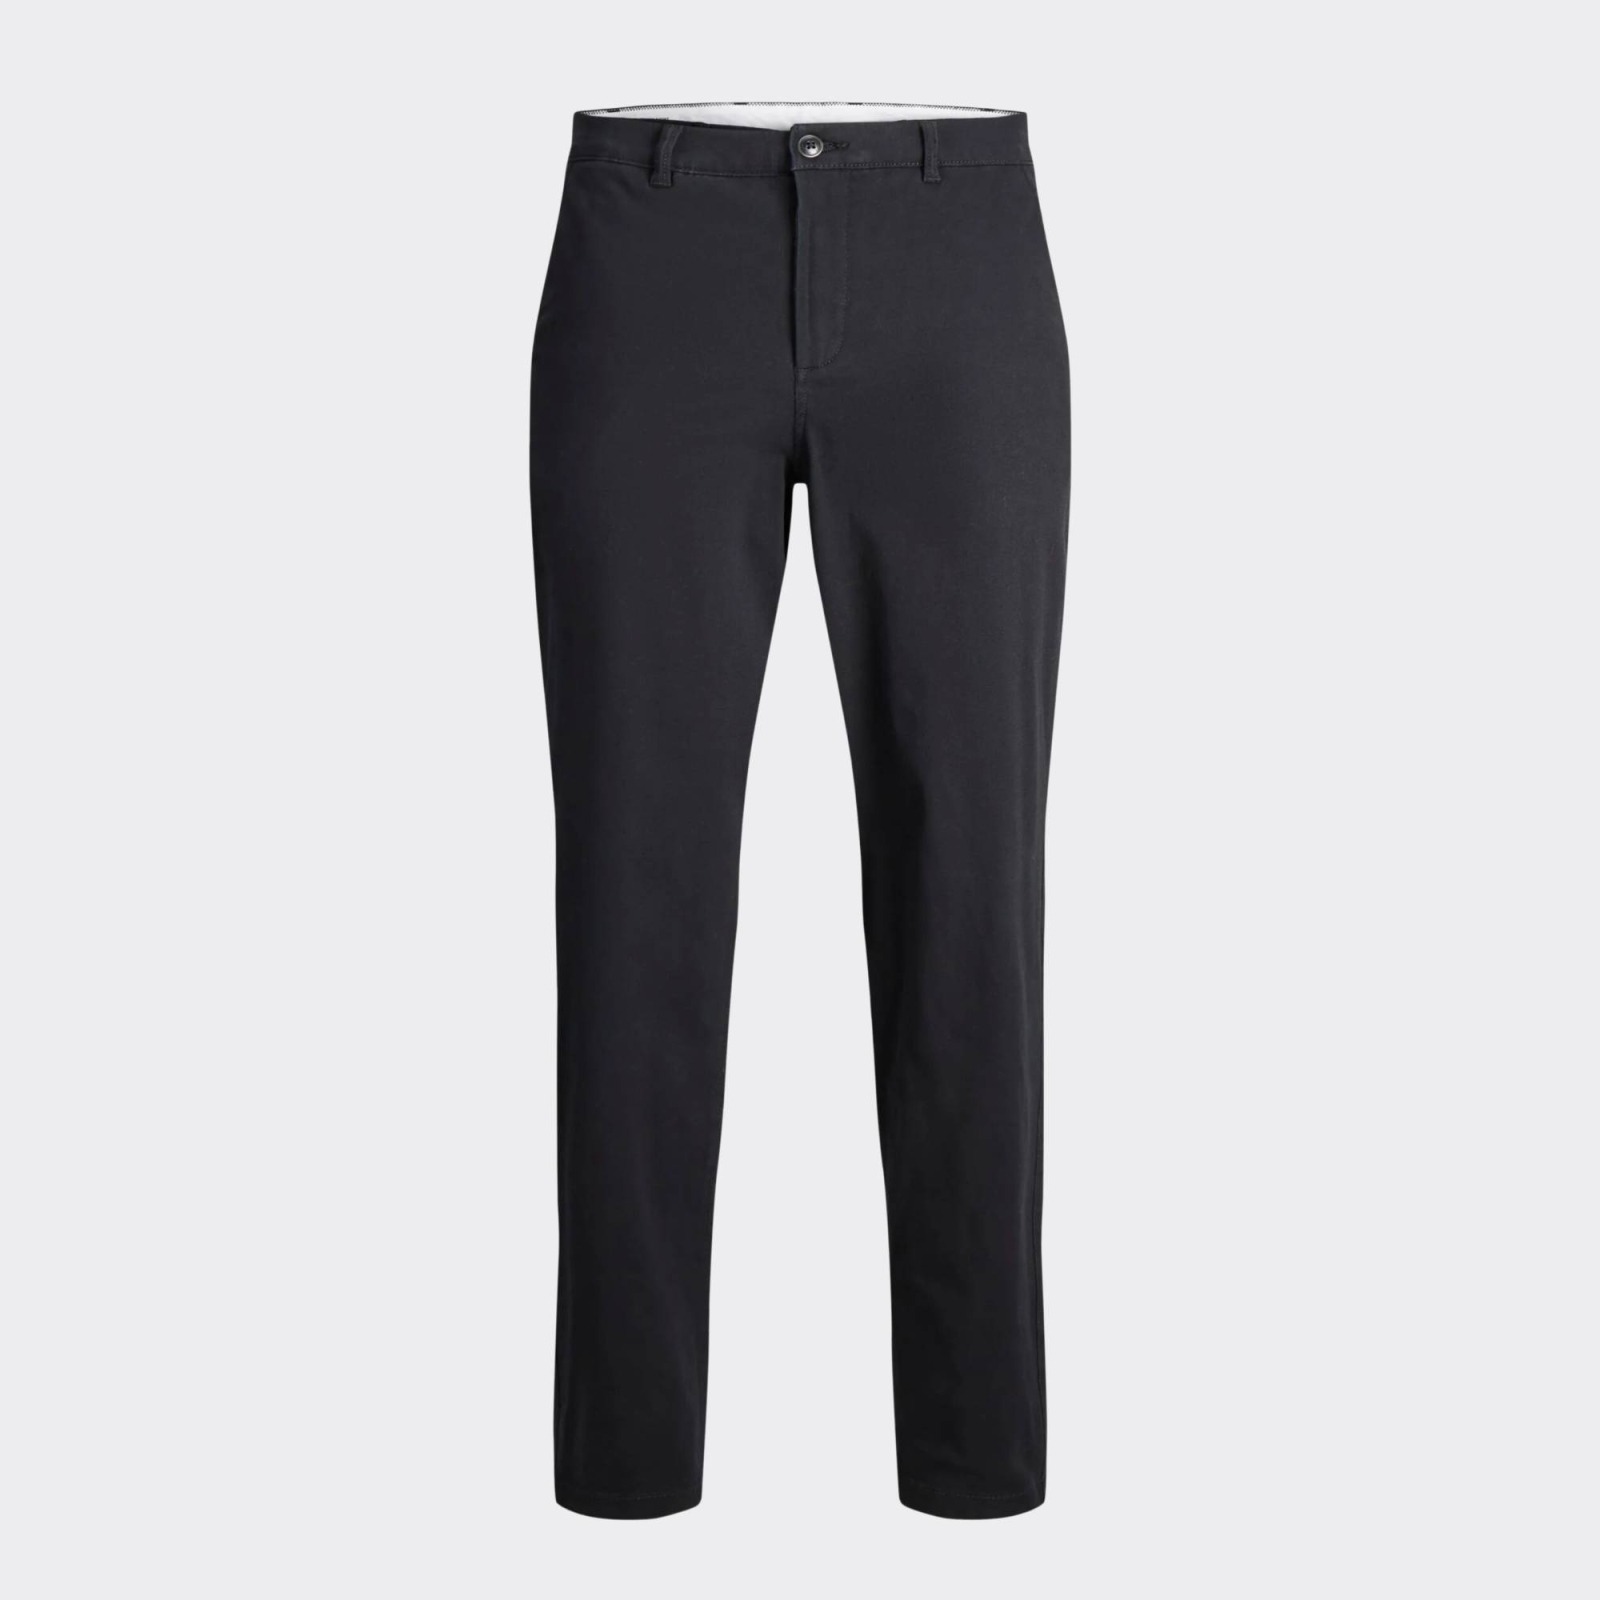 JACK AND JONES TAPPED CHINO PANT